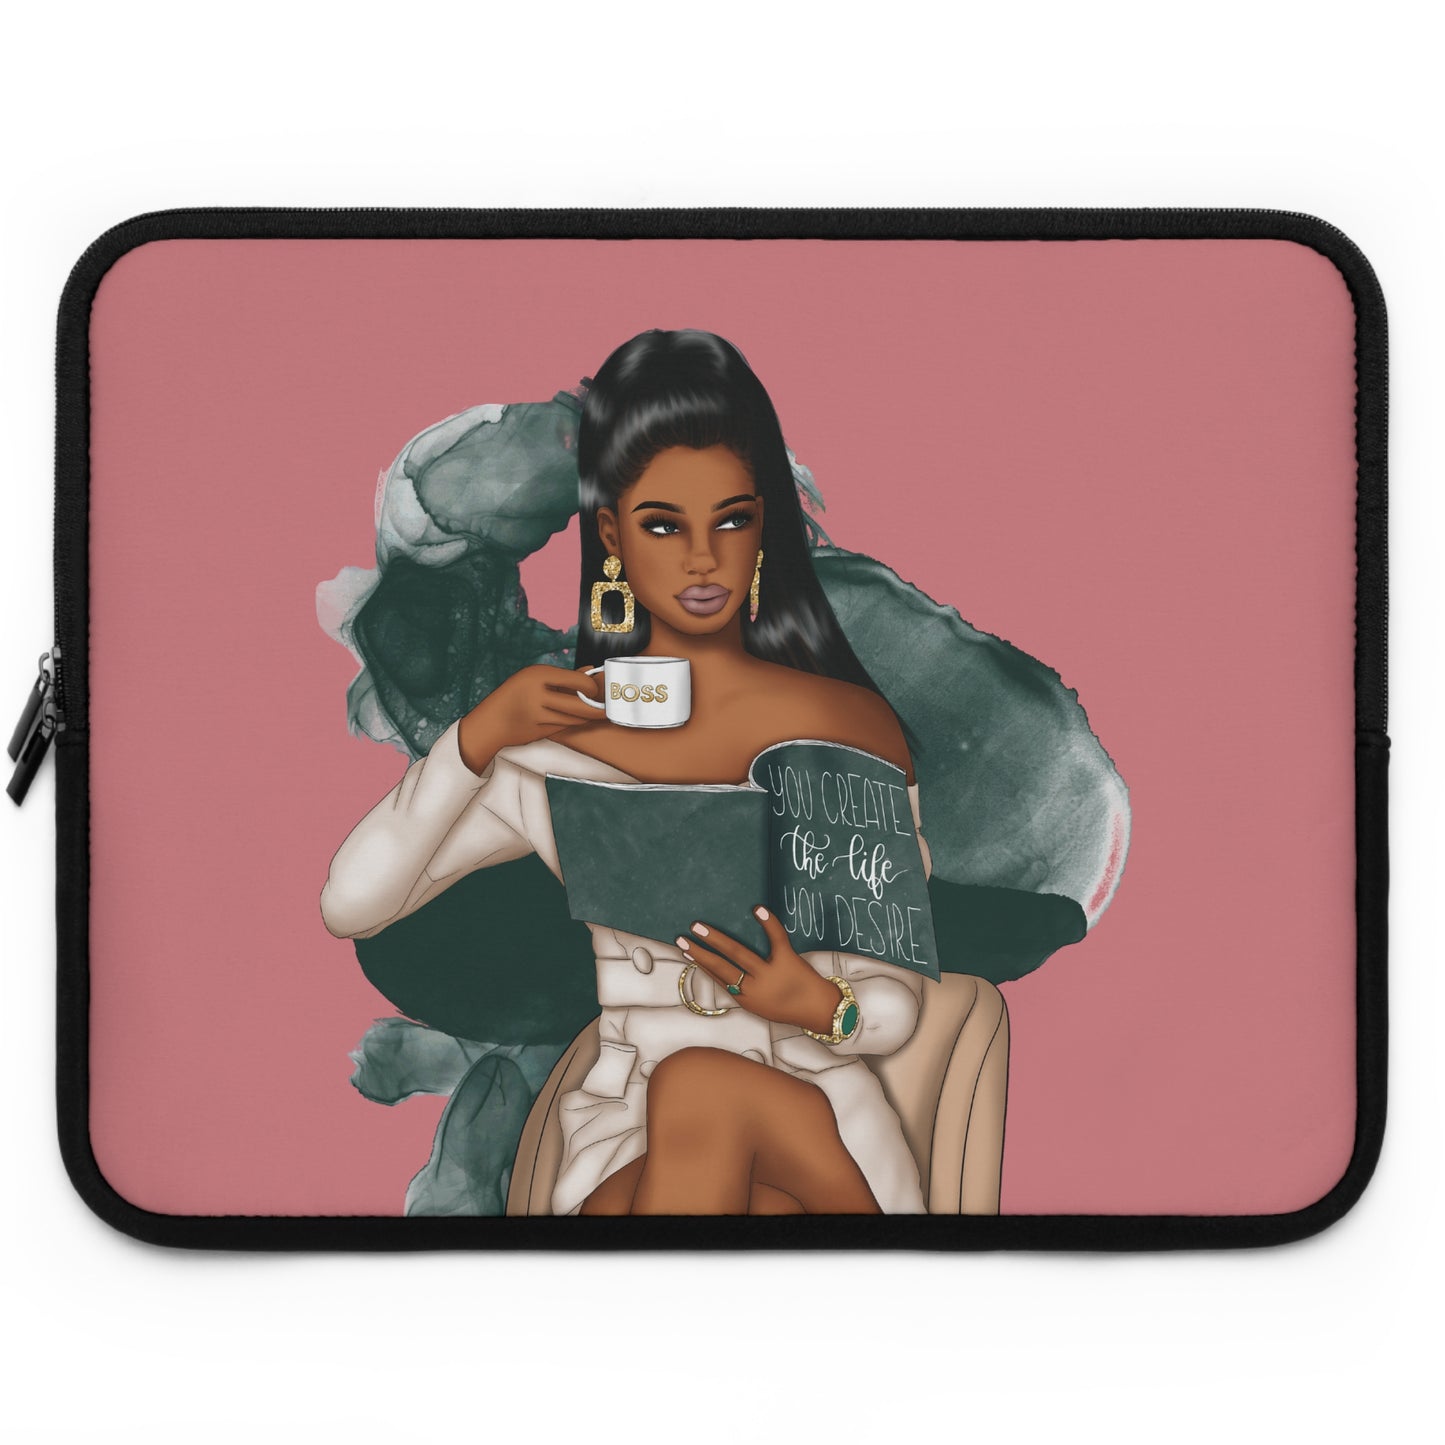 You Create the Life You Desire Laptop Cover (Dark Pink)